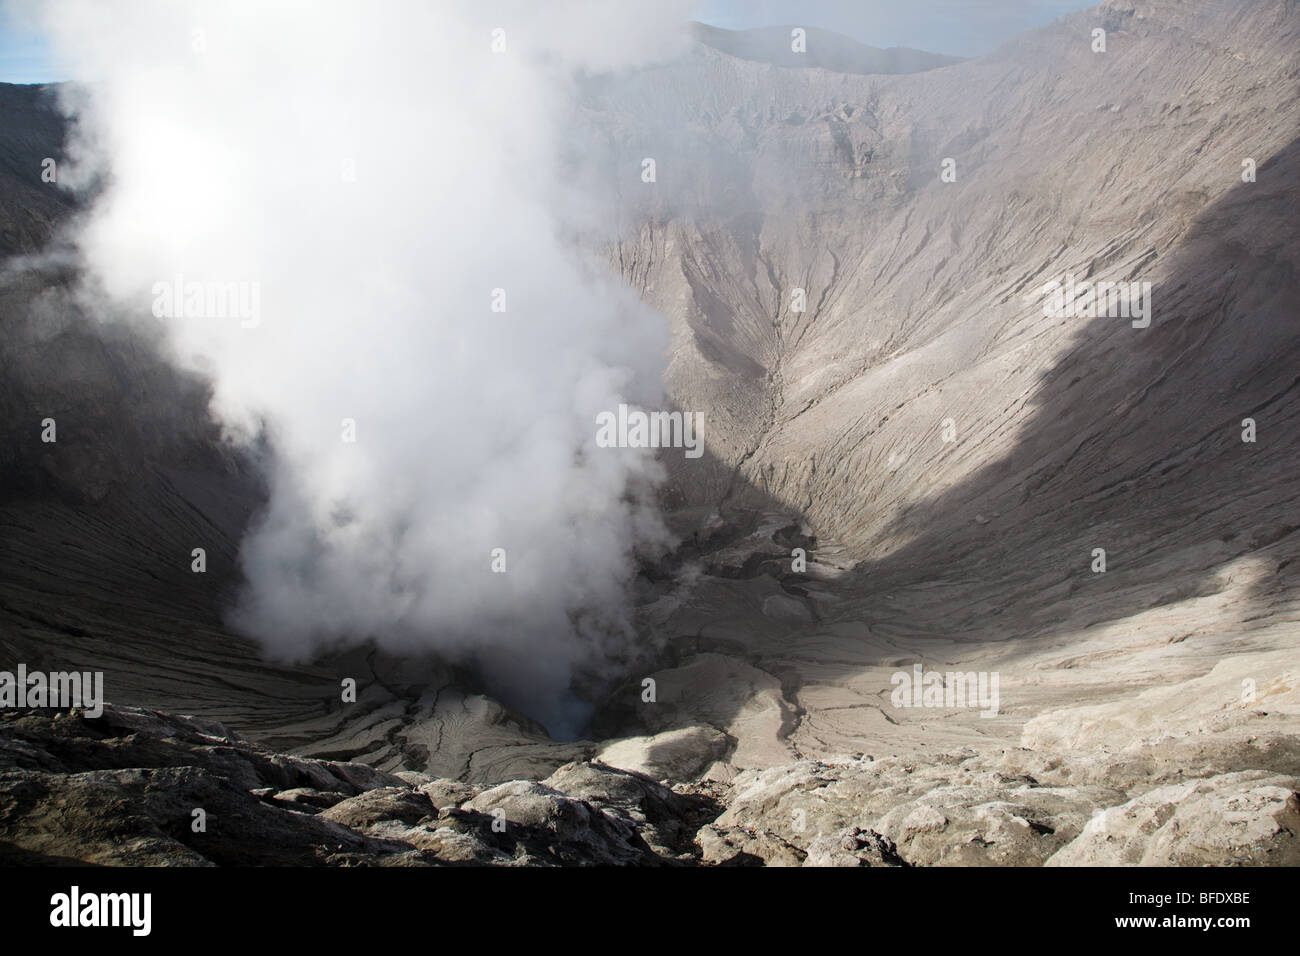 Crater with smoke of Mount Bromo volcano in Java, Indonesia before its eruption. Photo taken in September  2009. Stock Photo